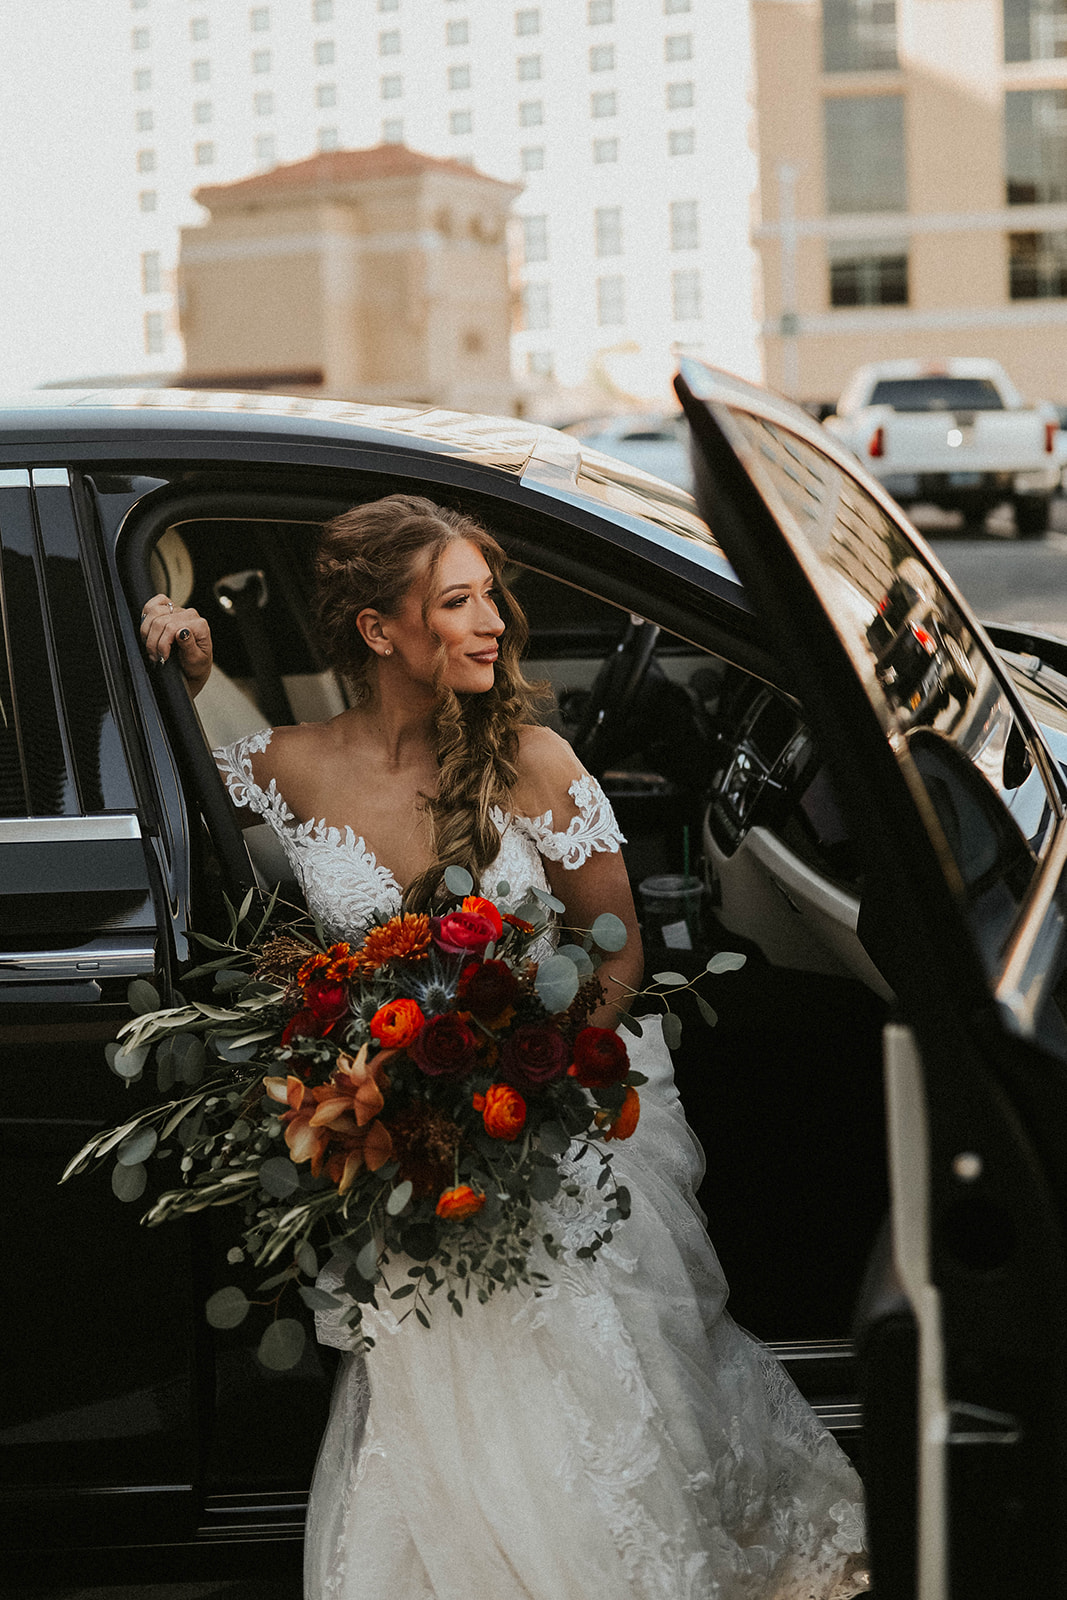 Bride getting in car leaving for ceremony